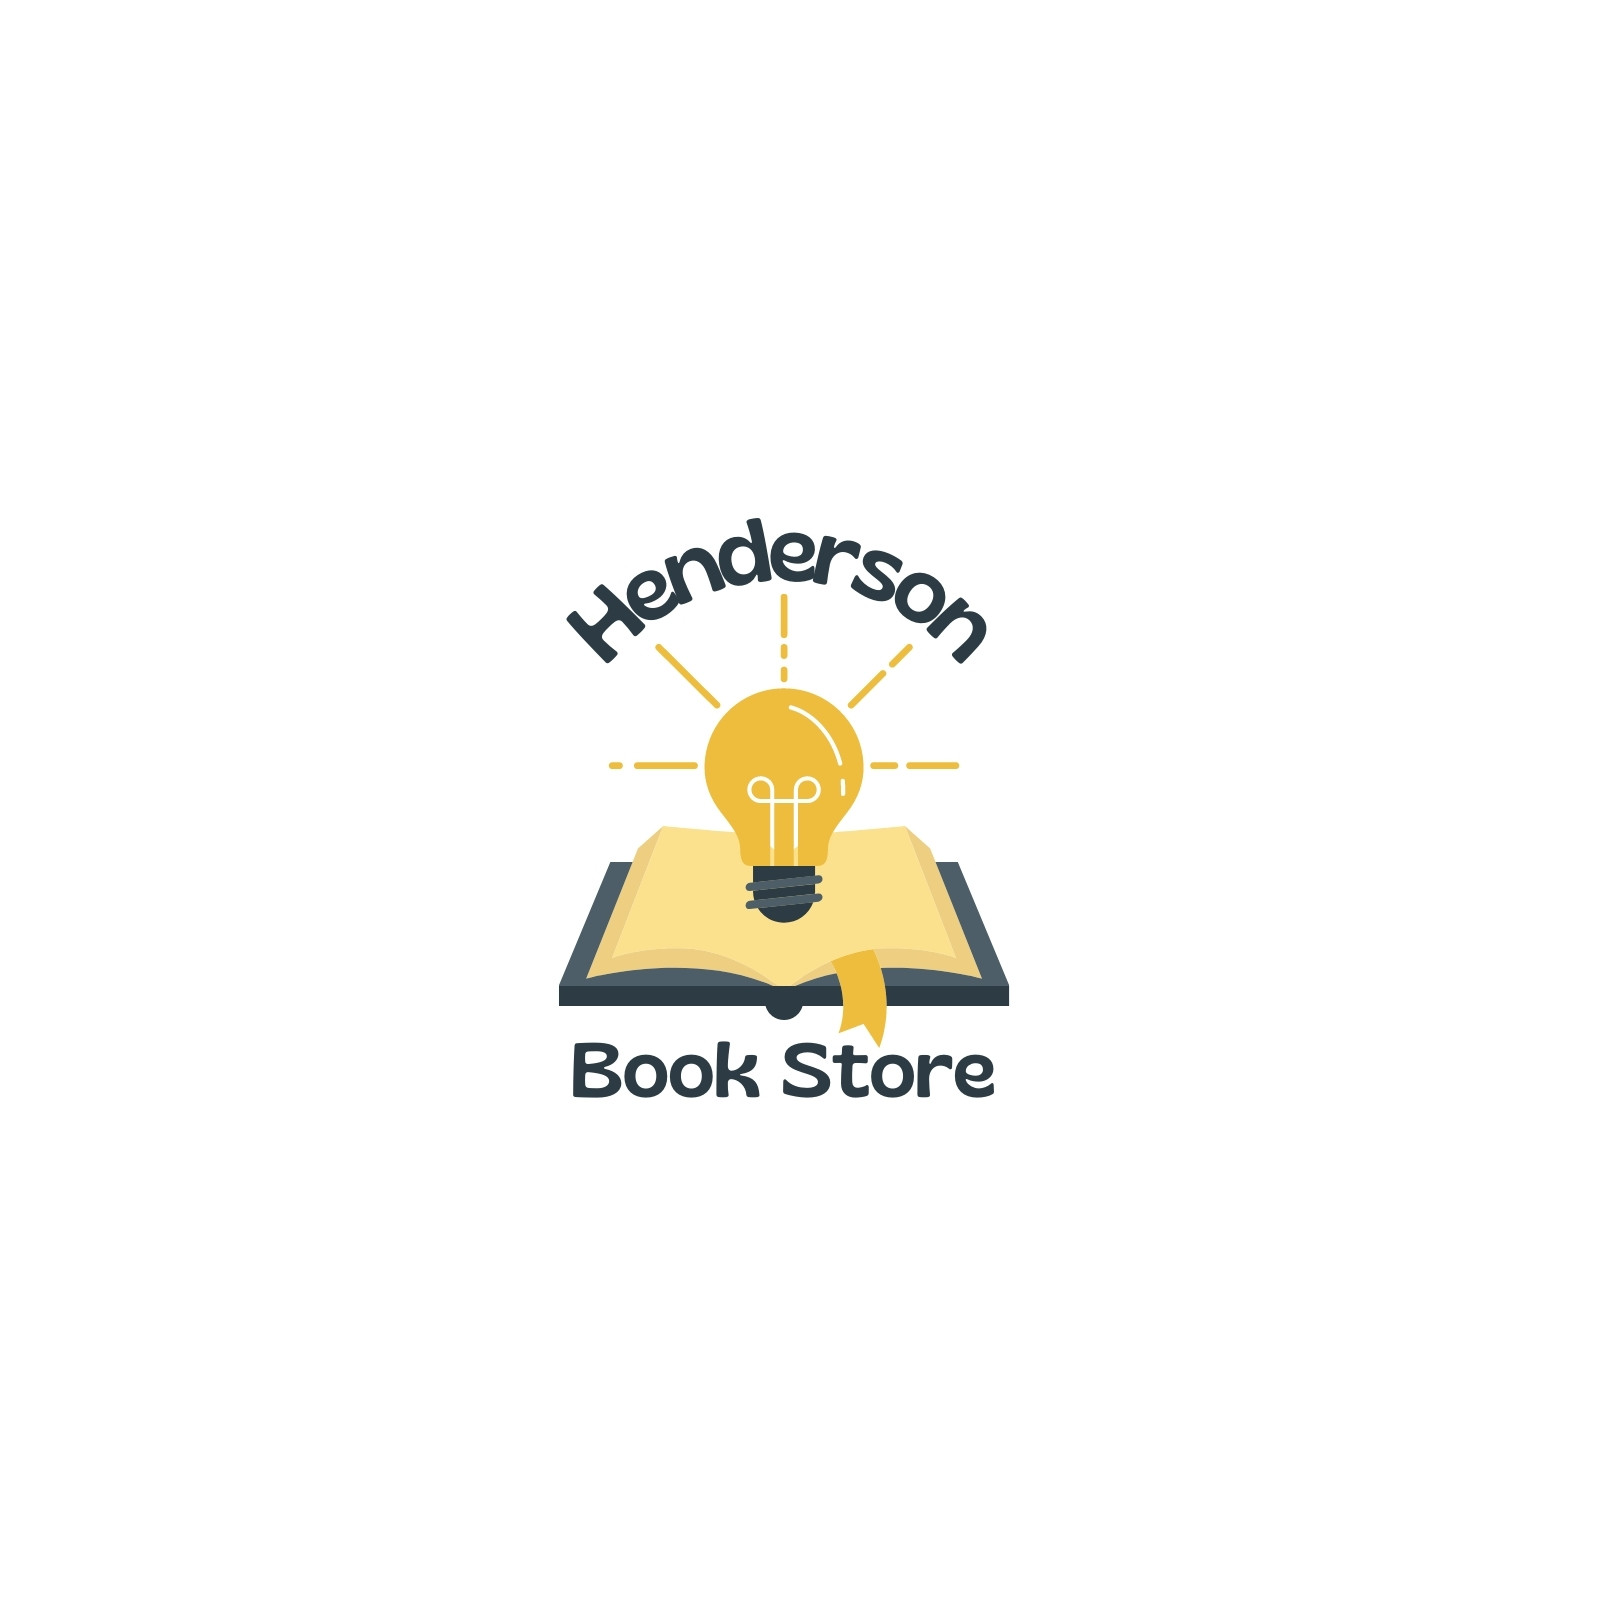 Book Shop Logo designs, themes, templates and downloadable graphic elements  on Dribbble